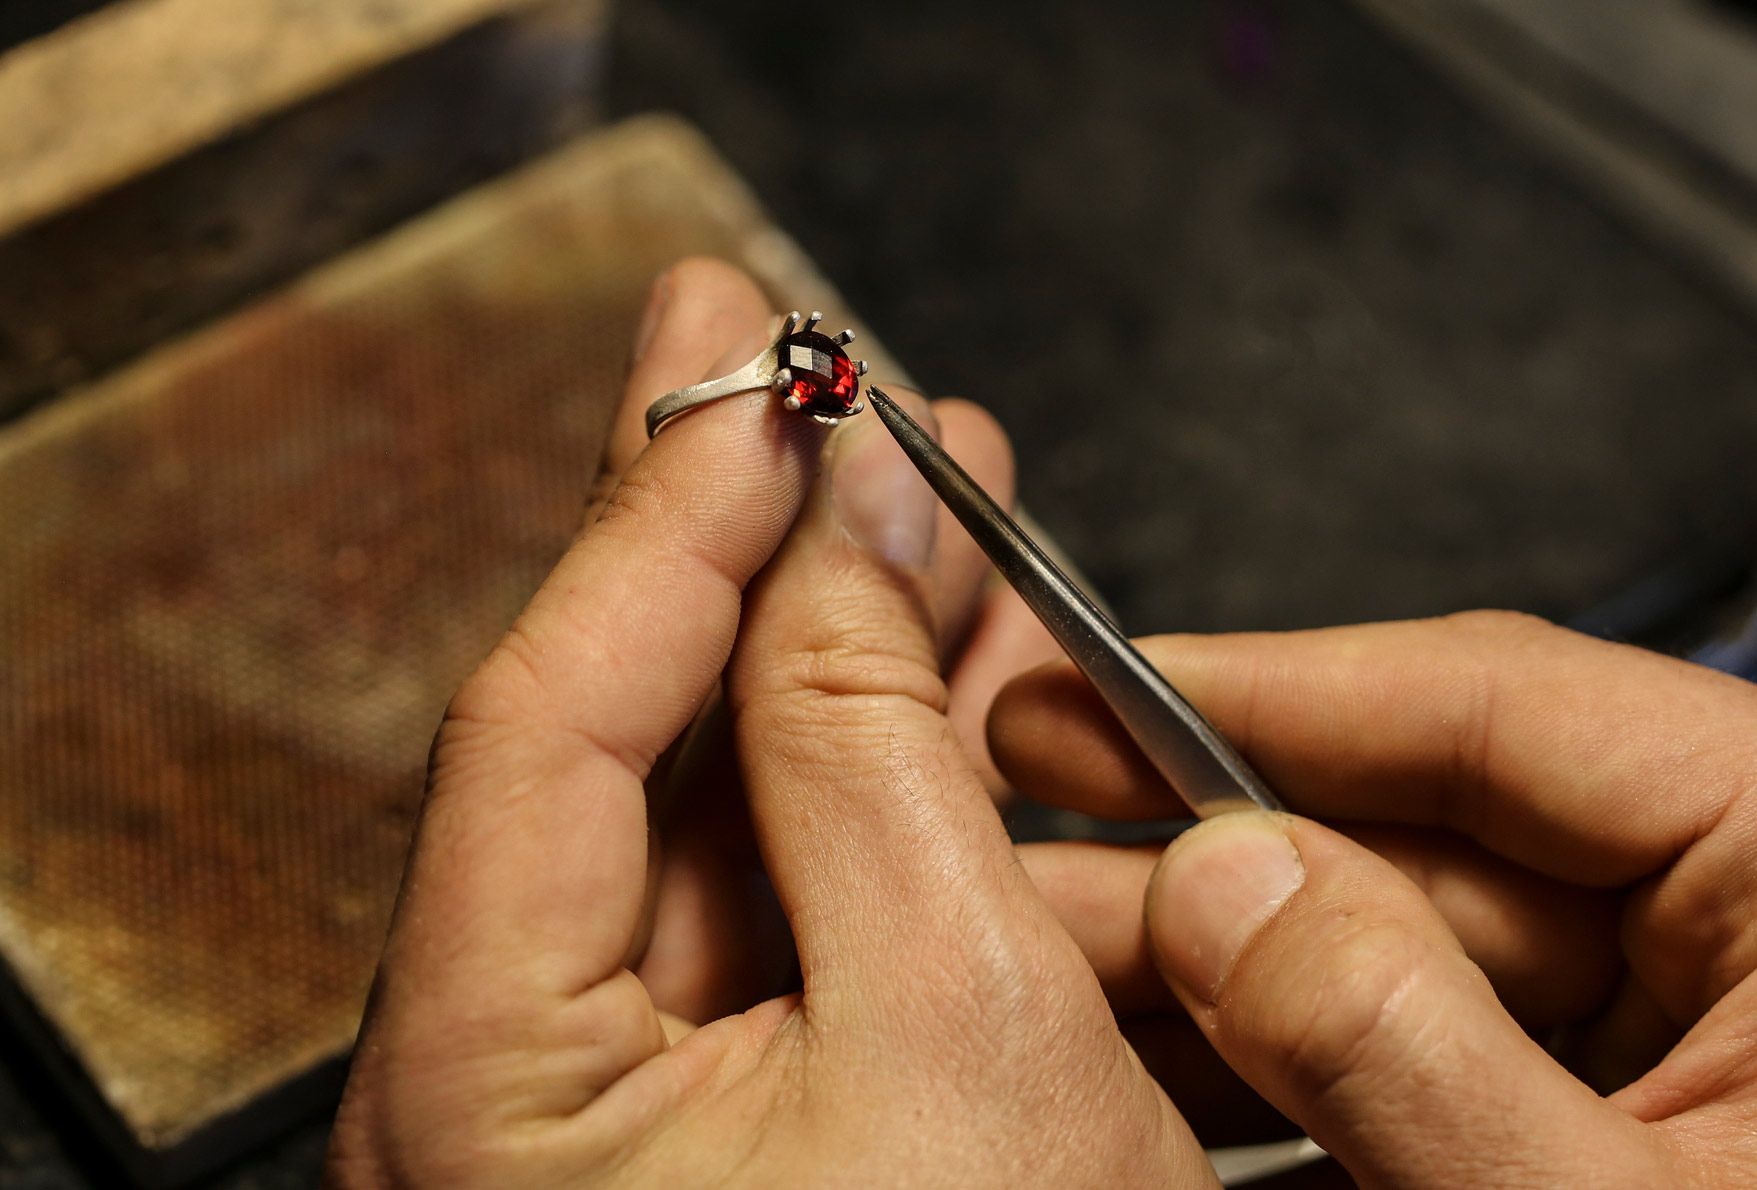 Repairing a ring with a red stone | Toowoomba, QLD | Aztec Jewellers & Valuation Services